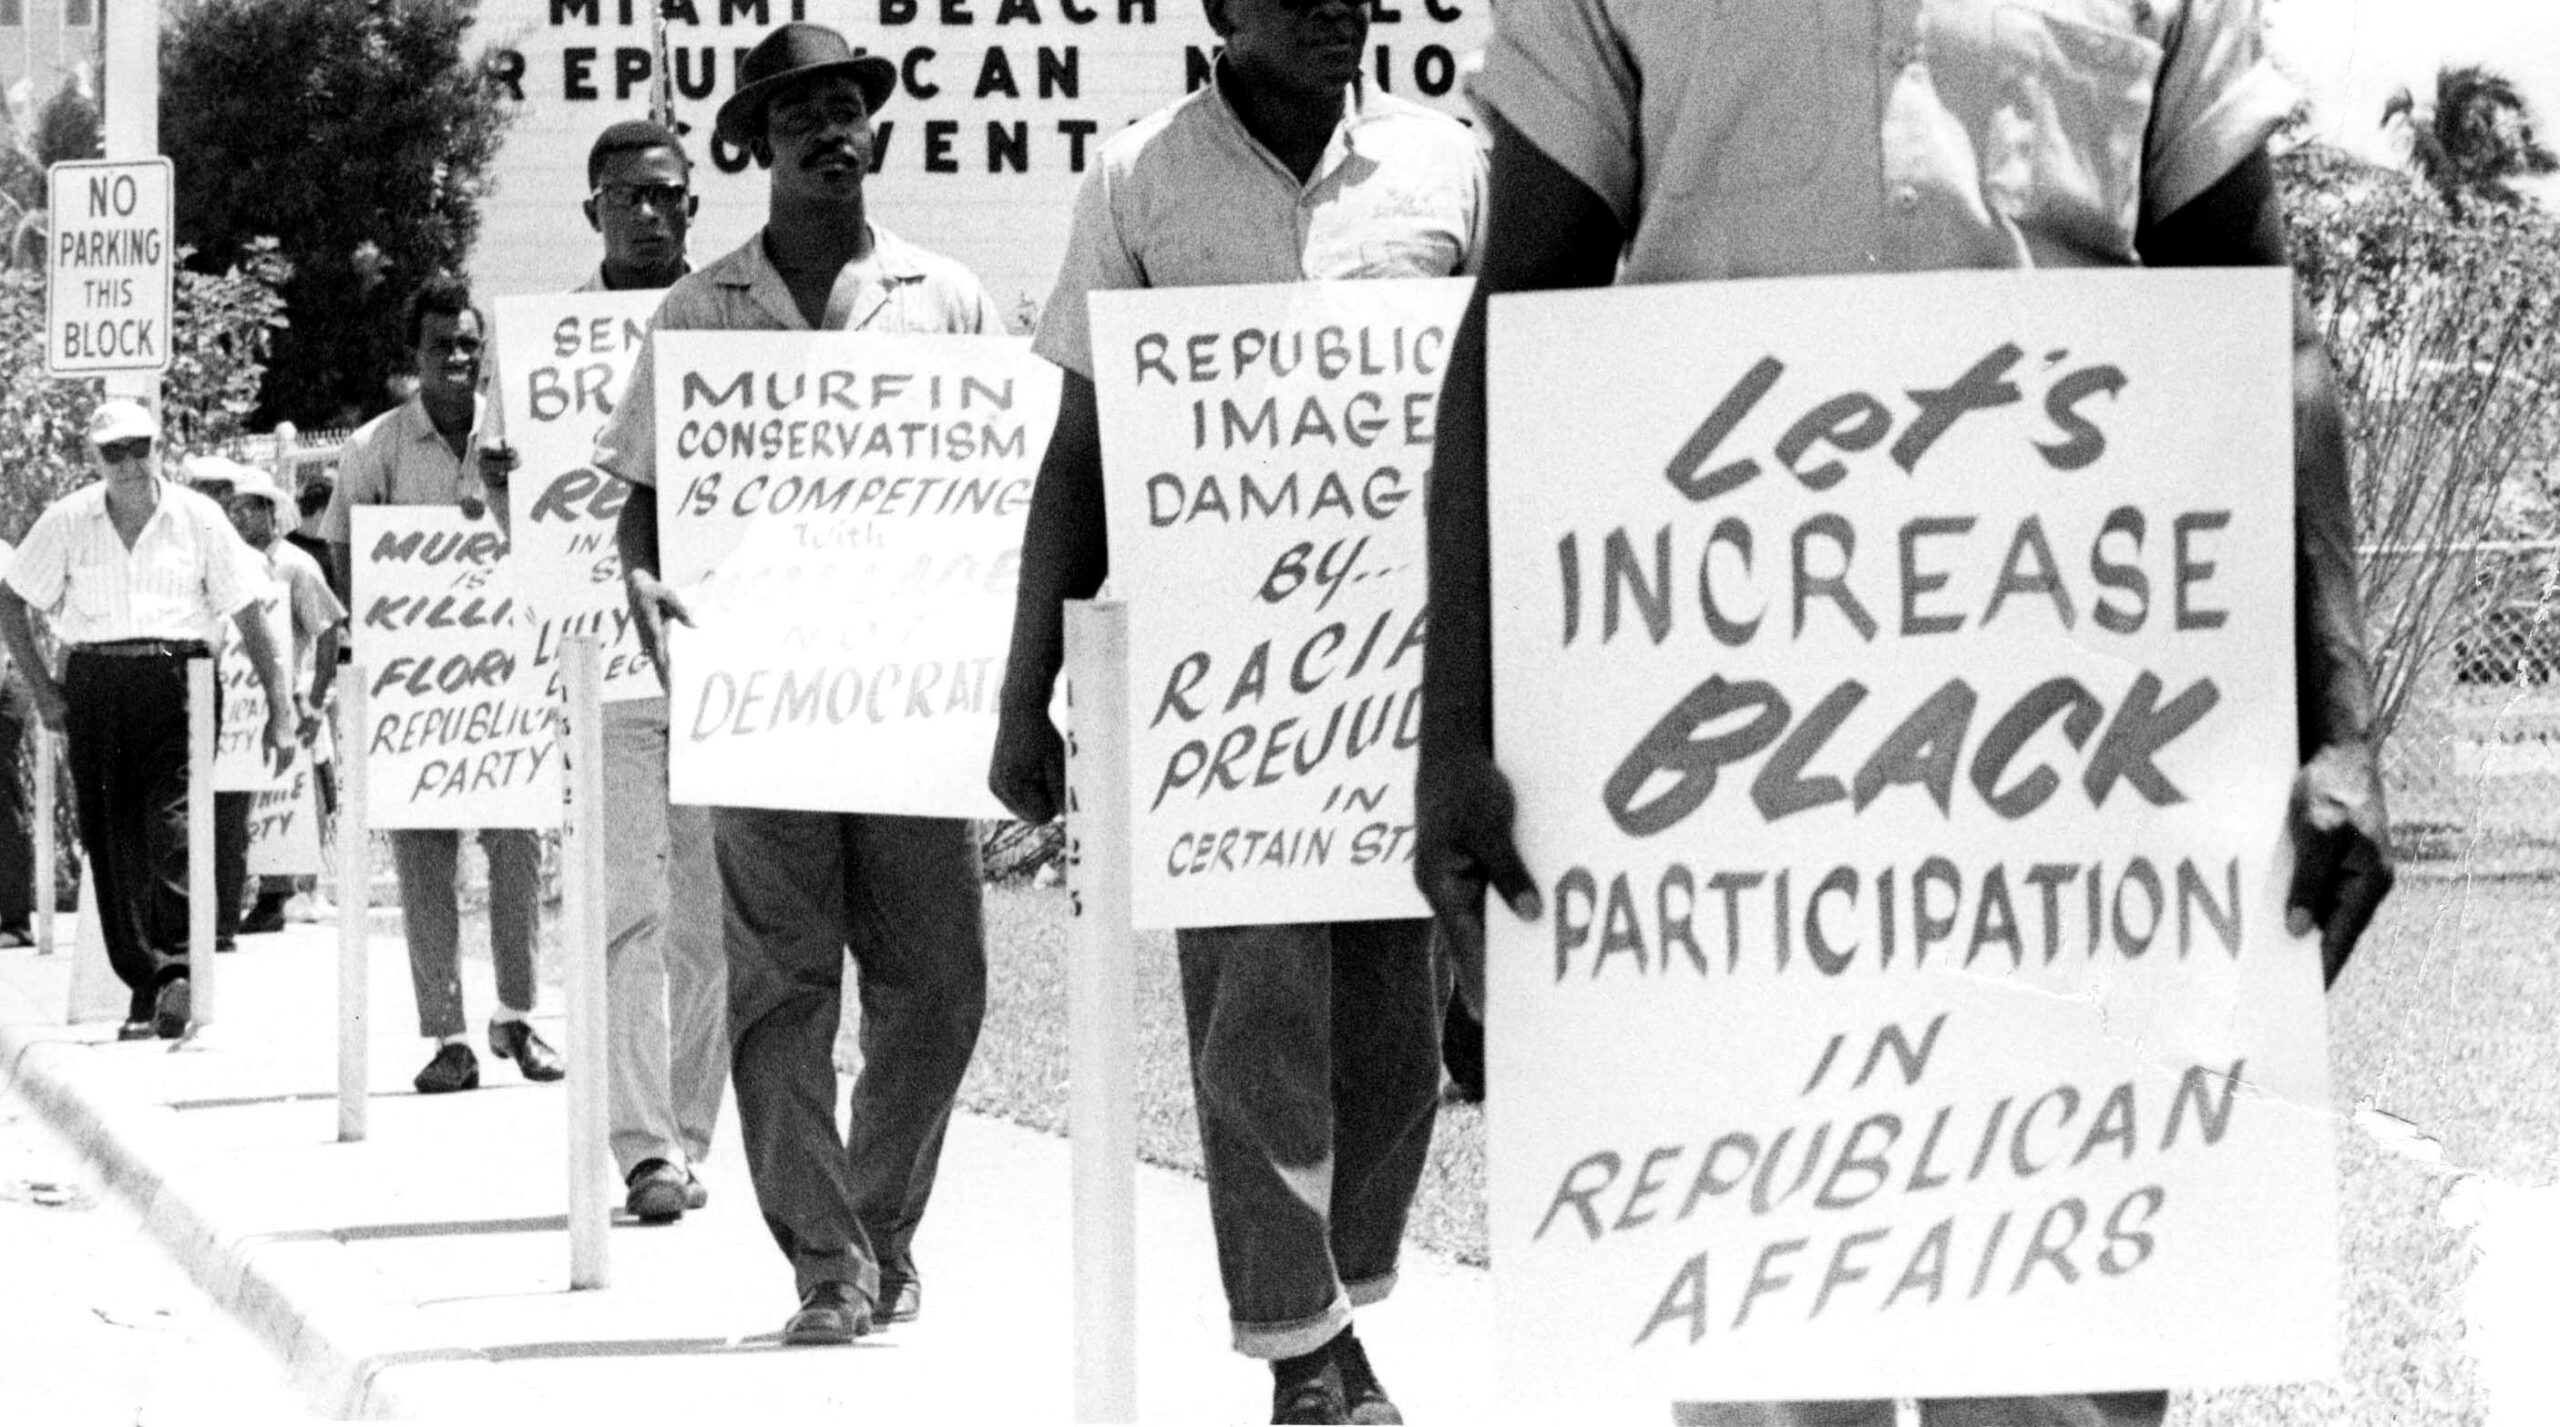 Stories of Resistance from Black Miami